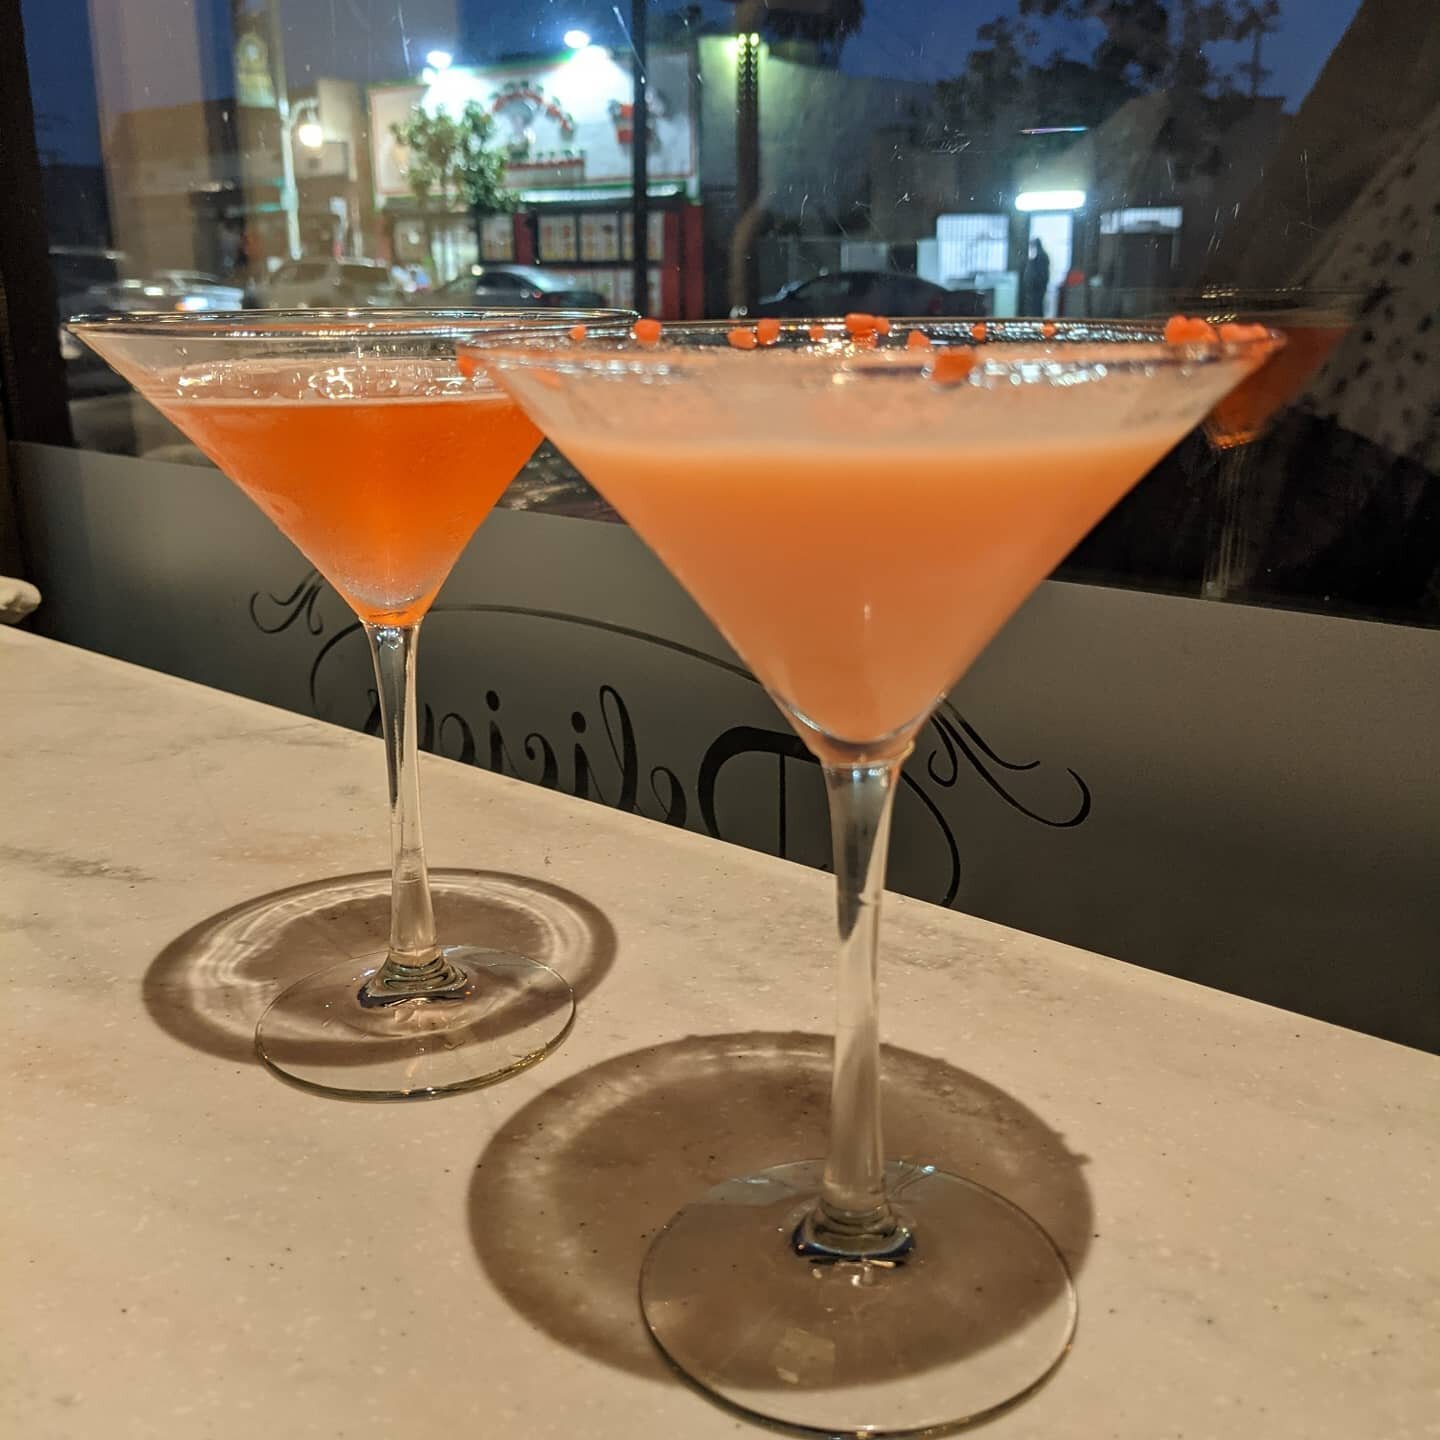 Try our Valentine's Day inspired cocktails

#cocktailsofinstagram #valentinesday2021 #patiodining #laeats  #dinela #bemyvalentine #sweetsformysweet #softlove #kissonthelips #betweenthesheets